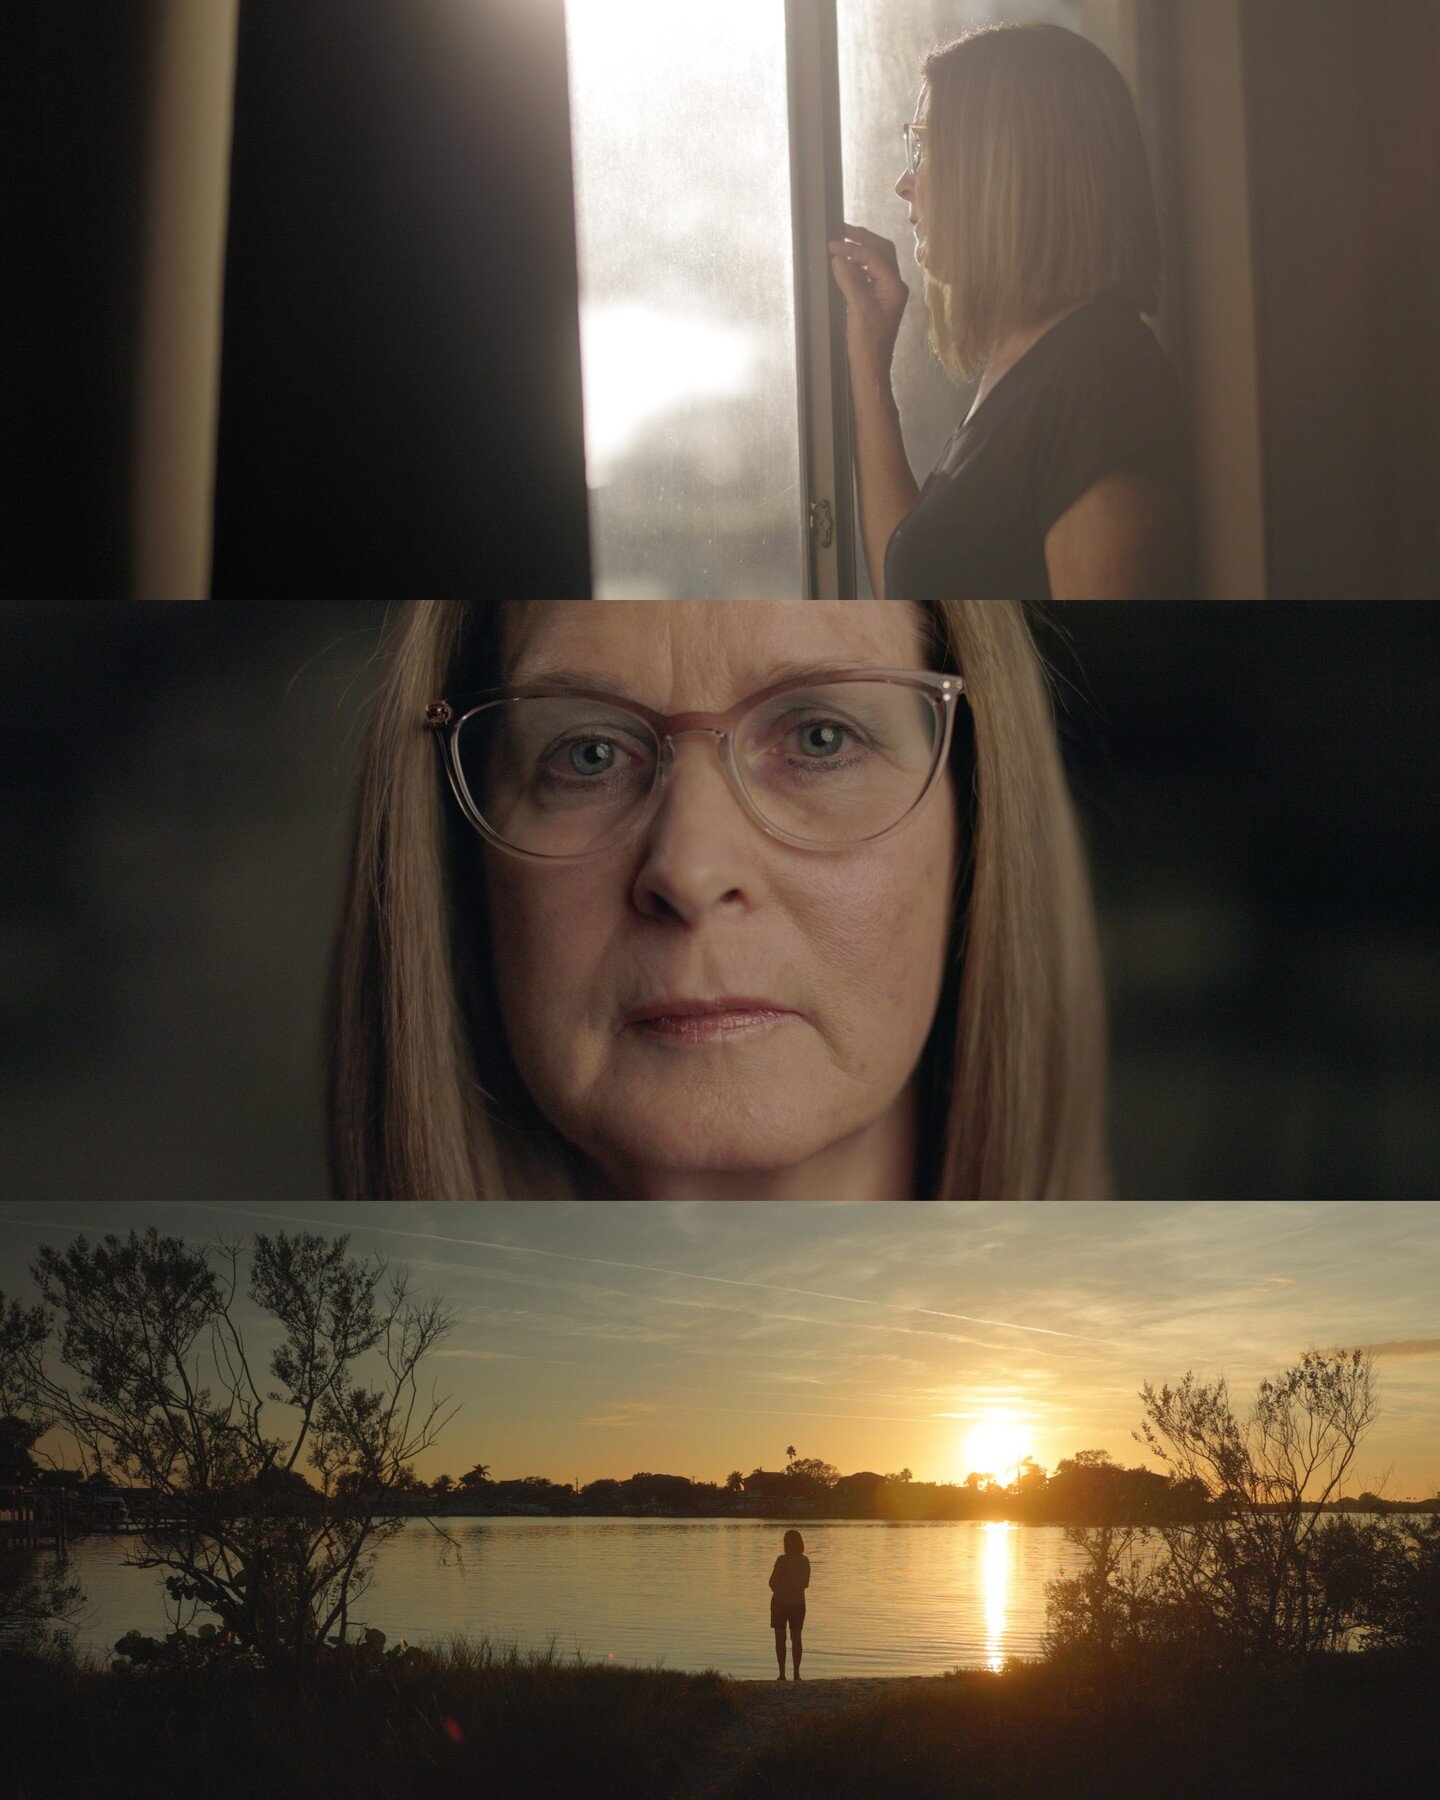 Some of my favorite stills from a short testimonial that's coming soon! I do love creating emotional documentary style videos and I don't get to do them very often. They're a ton of work but you get some of the most real human images and story. I lov